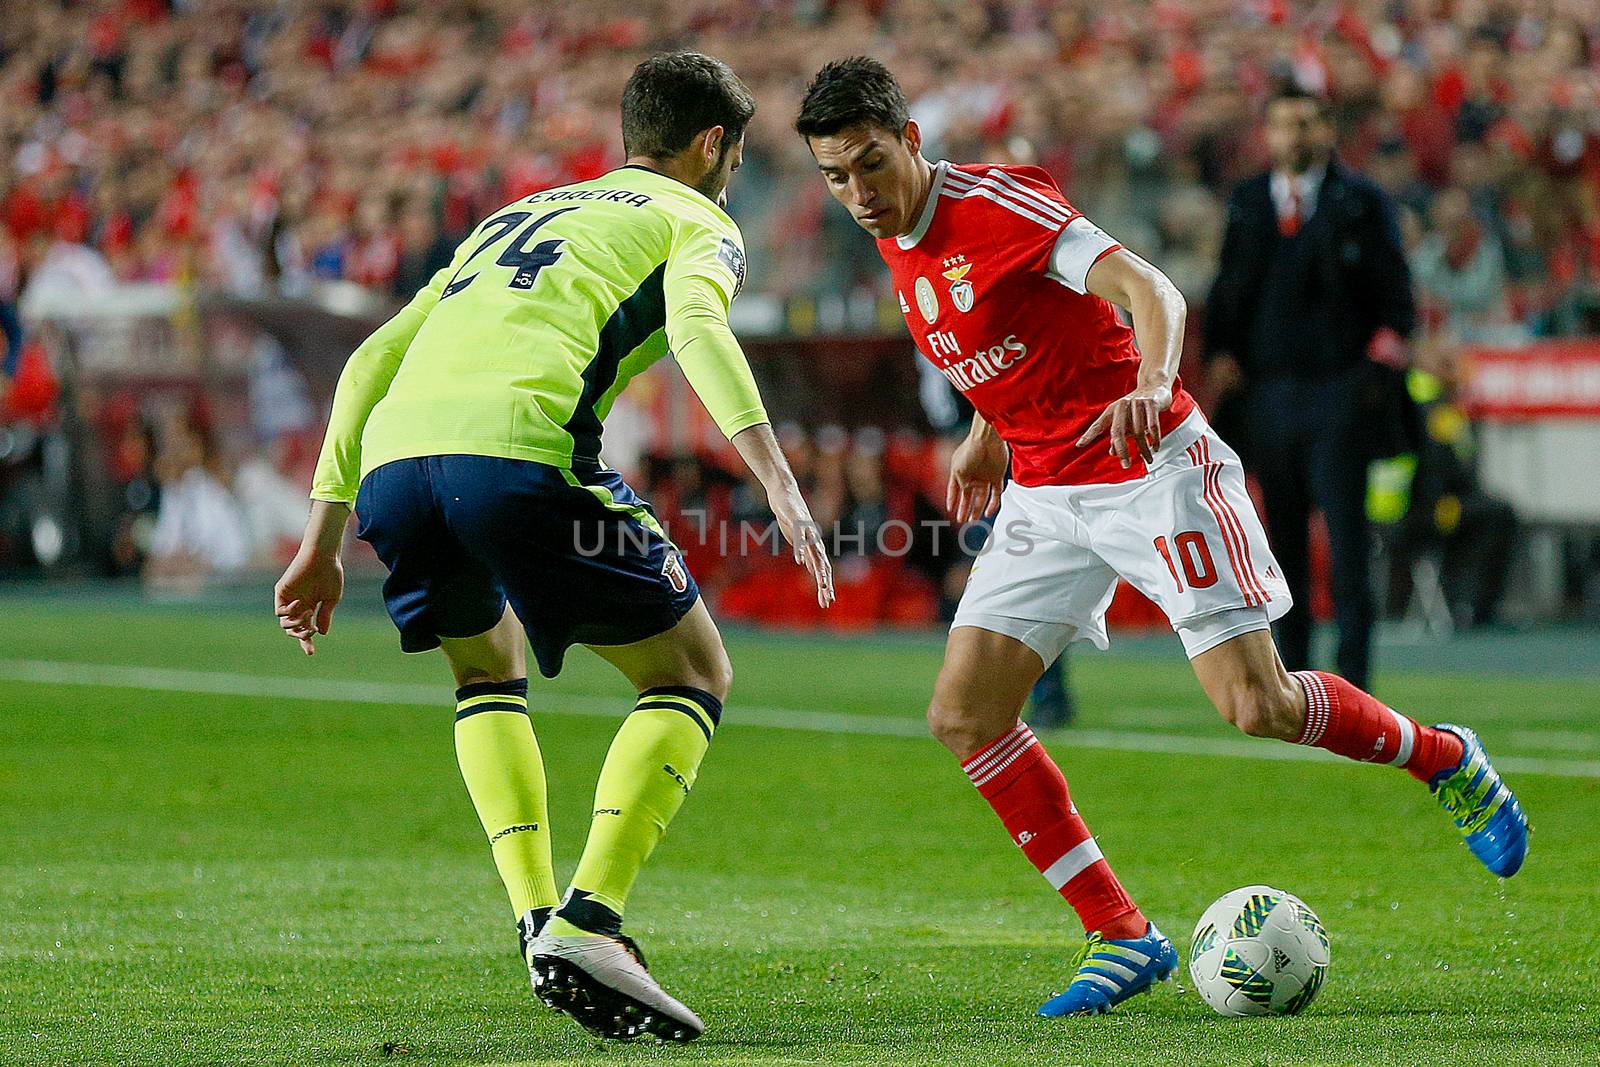 PORTUGAL, Lisbon: Benfica's midfielder Nico Gaitan (R) is pictured during the Portuguese Liga football match between Benfica and SC Braga (5-1) at Luz Stadium, in Lisbon, on April 1, 2016.